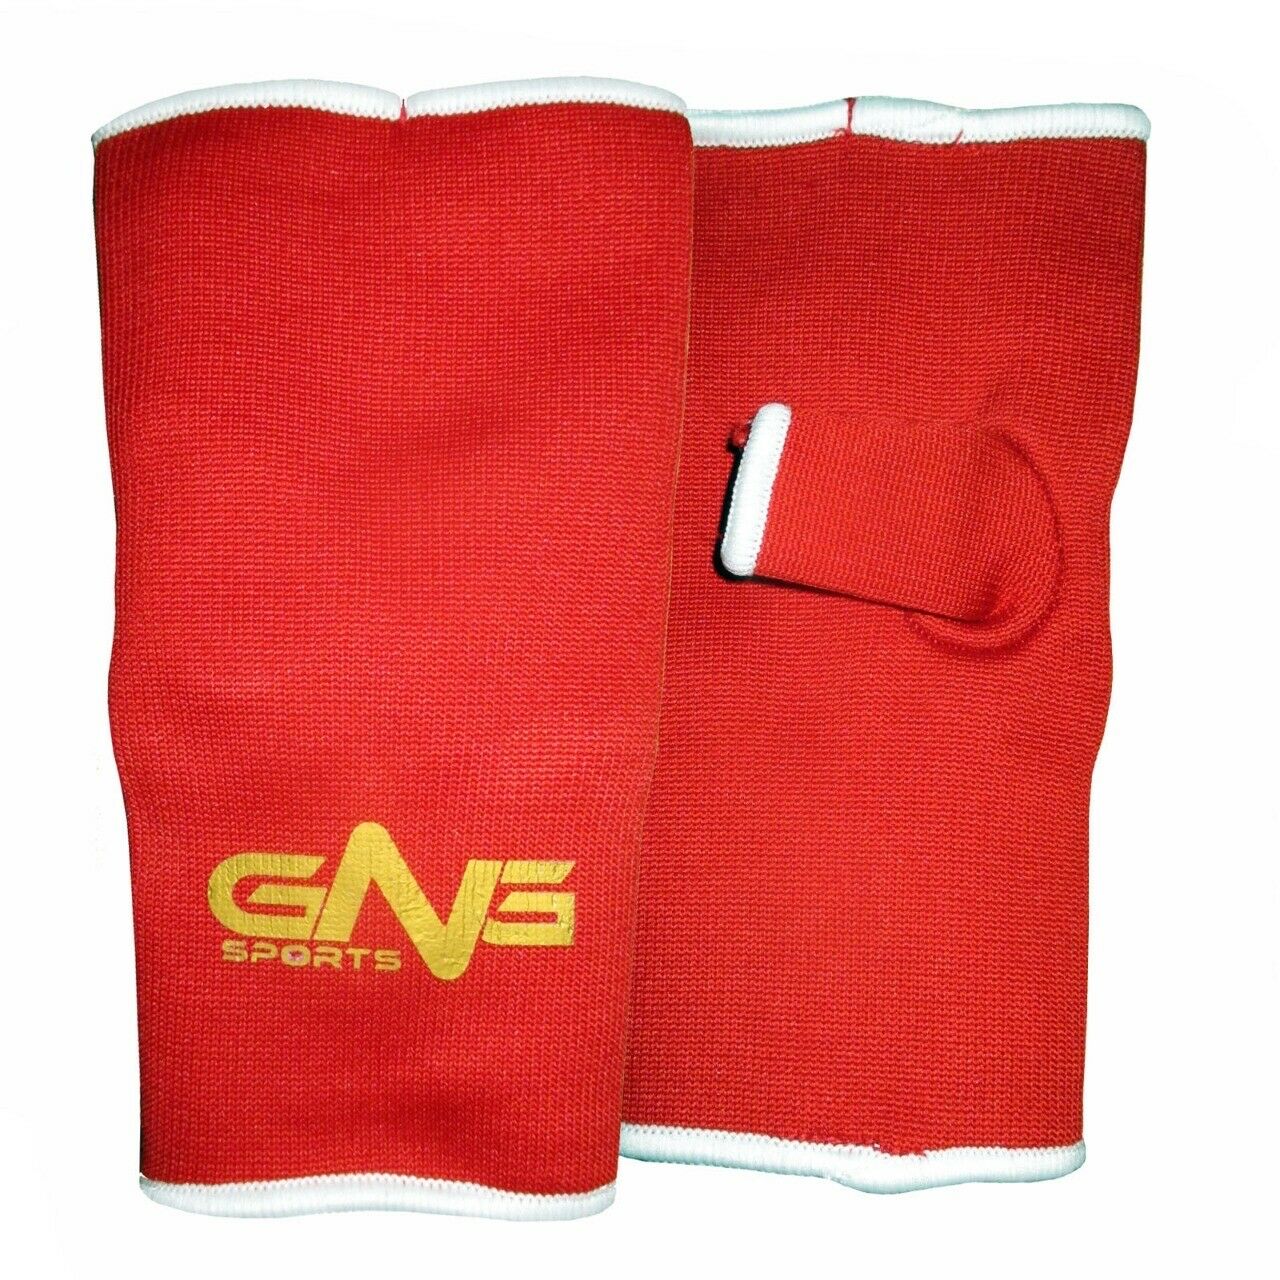 GnG MMA Boxing Gel Gloves Hand wraps Inner Glove UFC Sparring Martial Arts Gear 